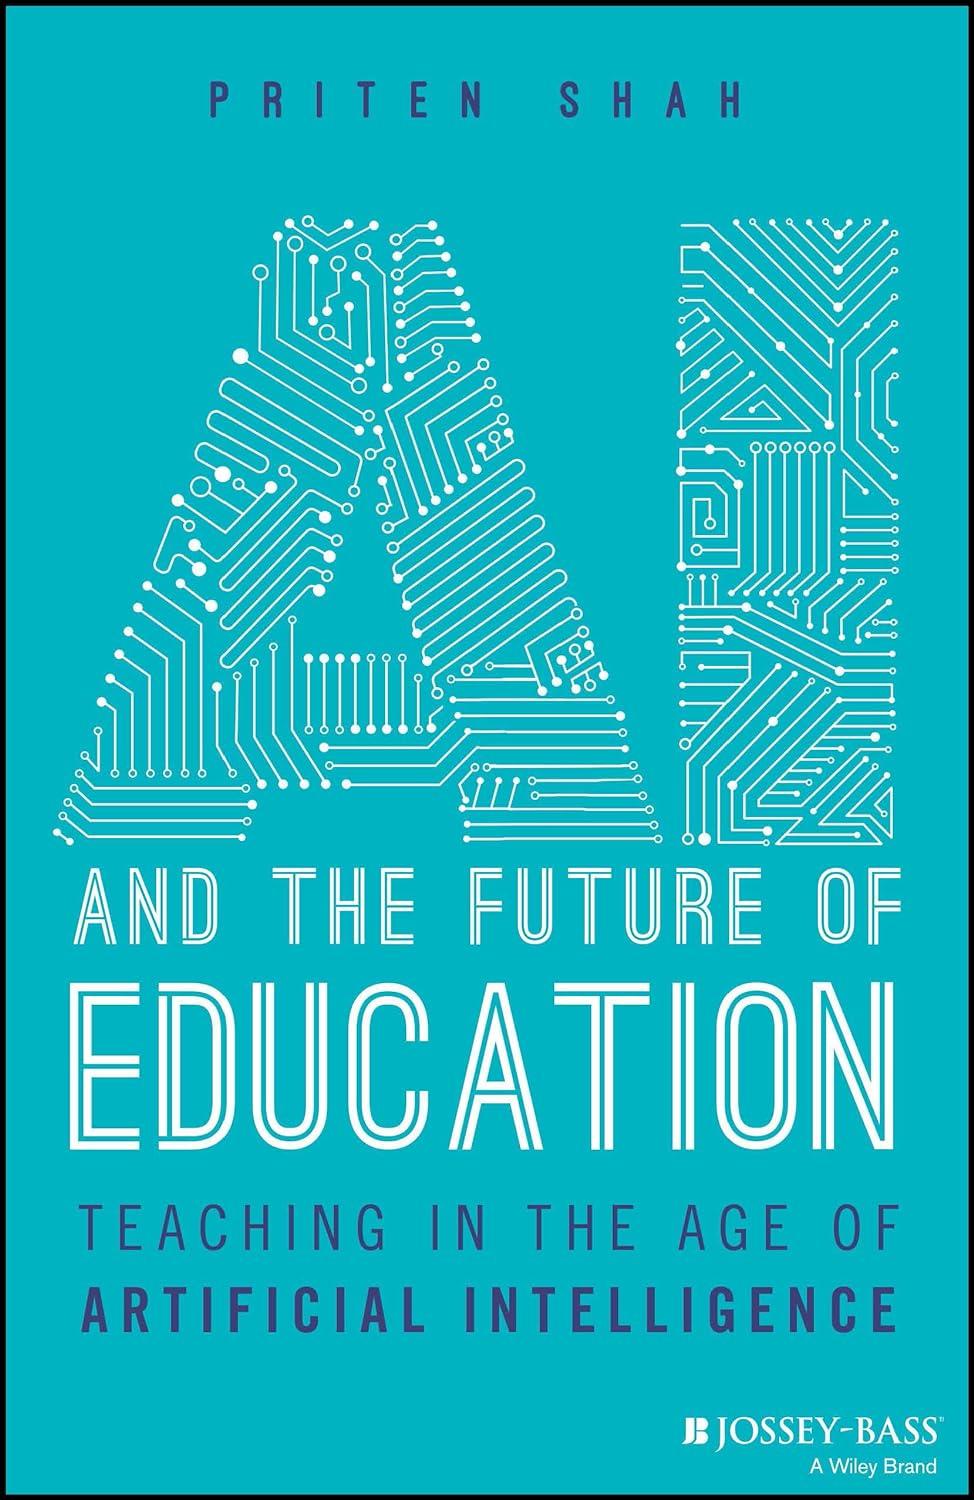 ai and the future of education teaching in the age of artificial intelligence 1st edition priten shah